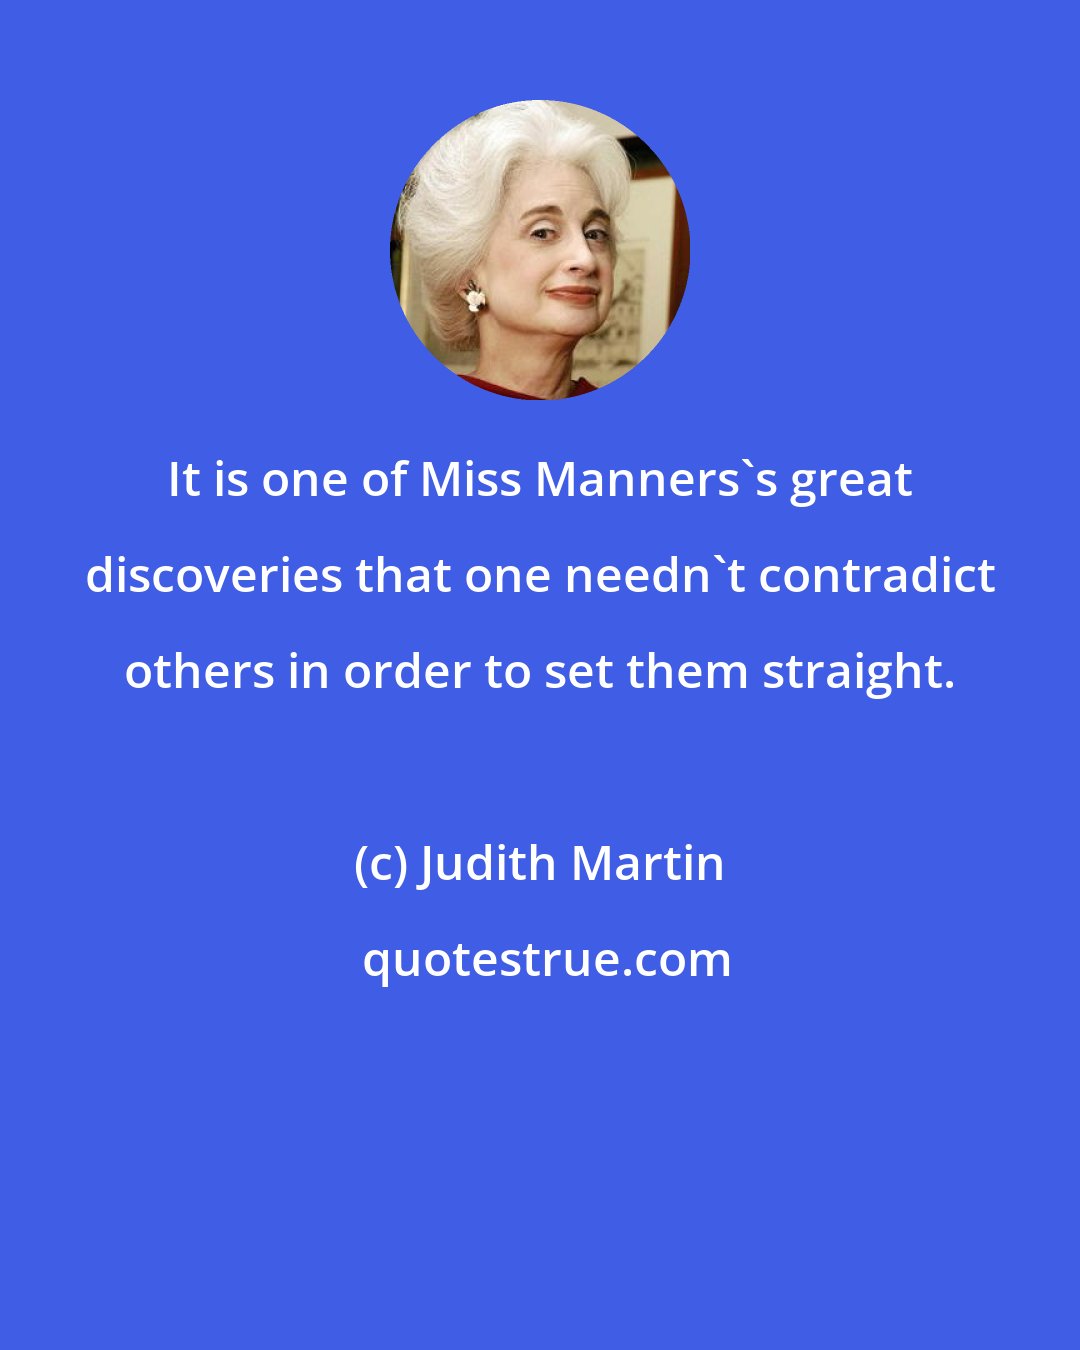 Judith Martin: It is one of Miss Manners's great discoveries that one needn't contradict others in order to set them straight.